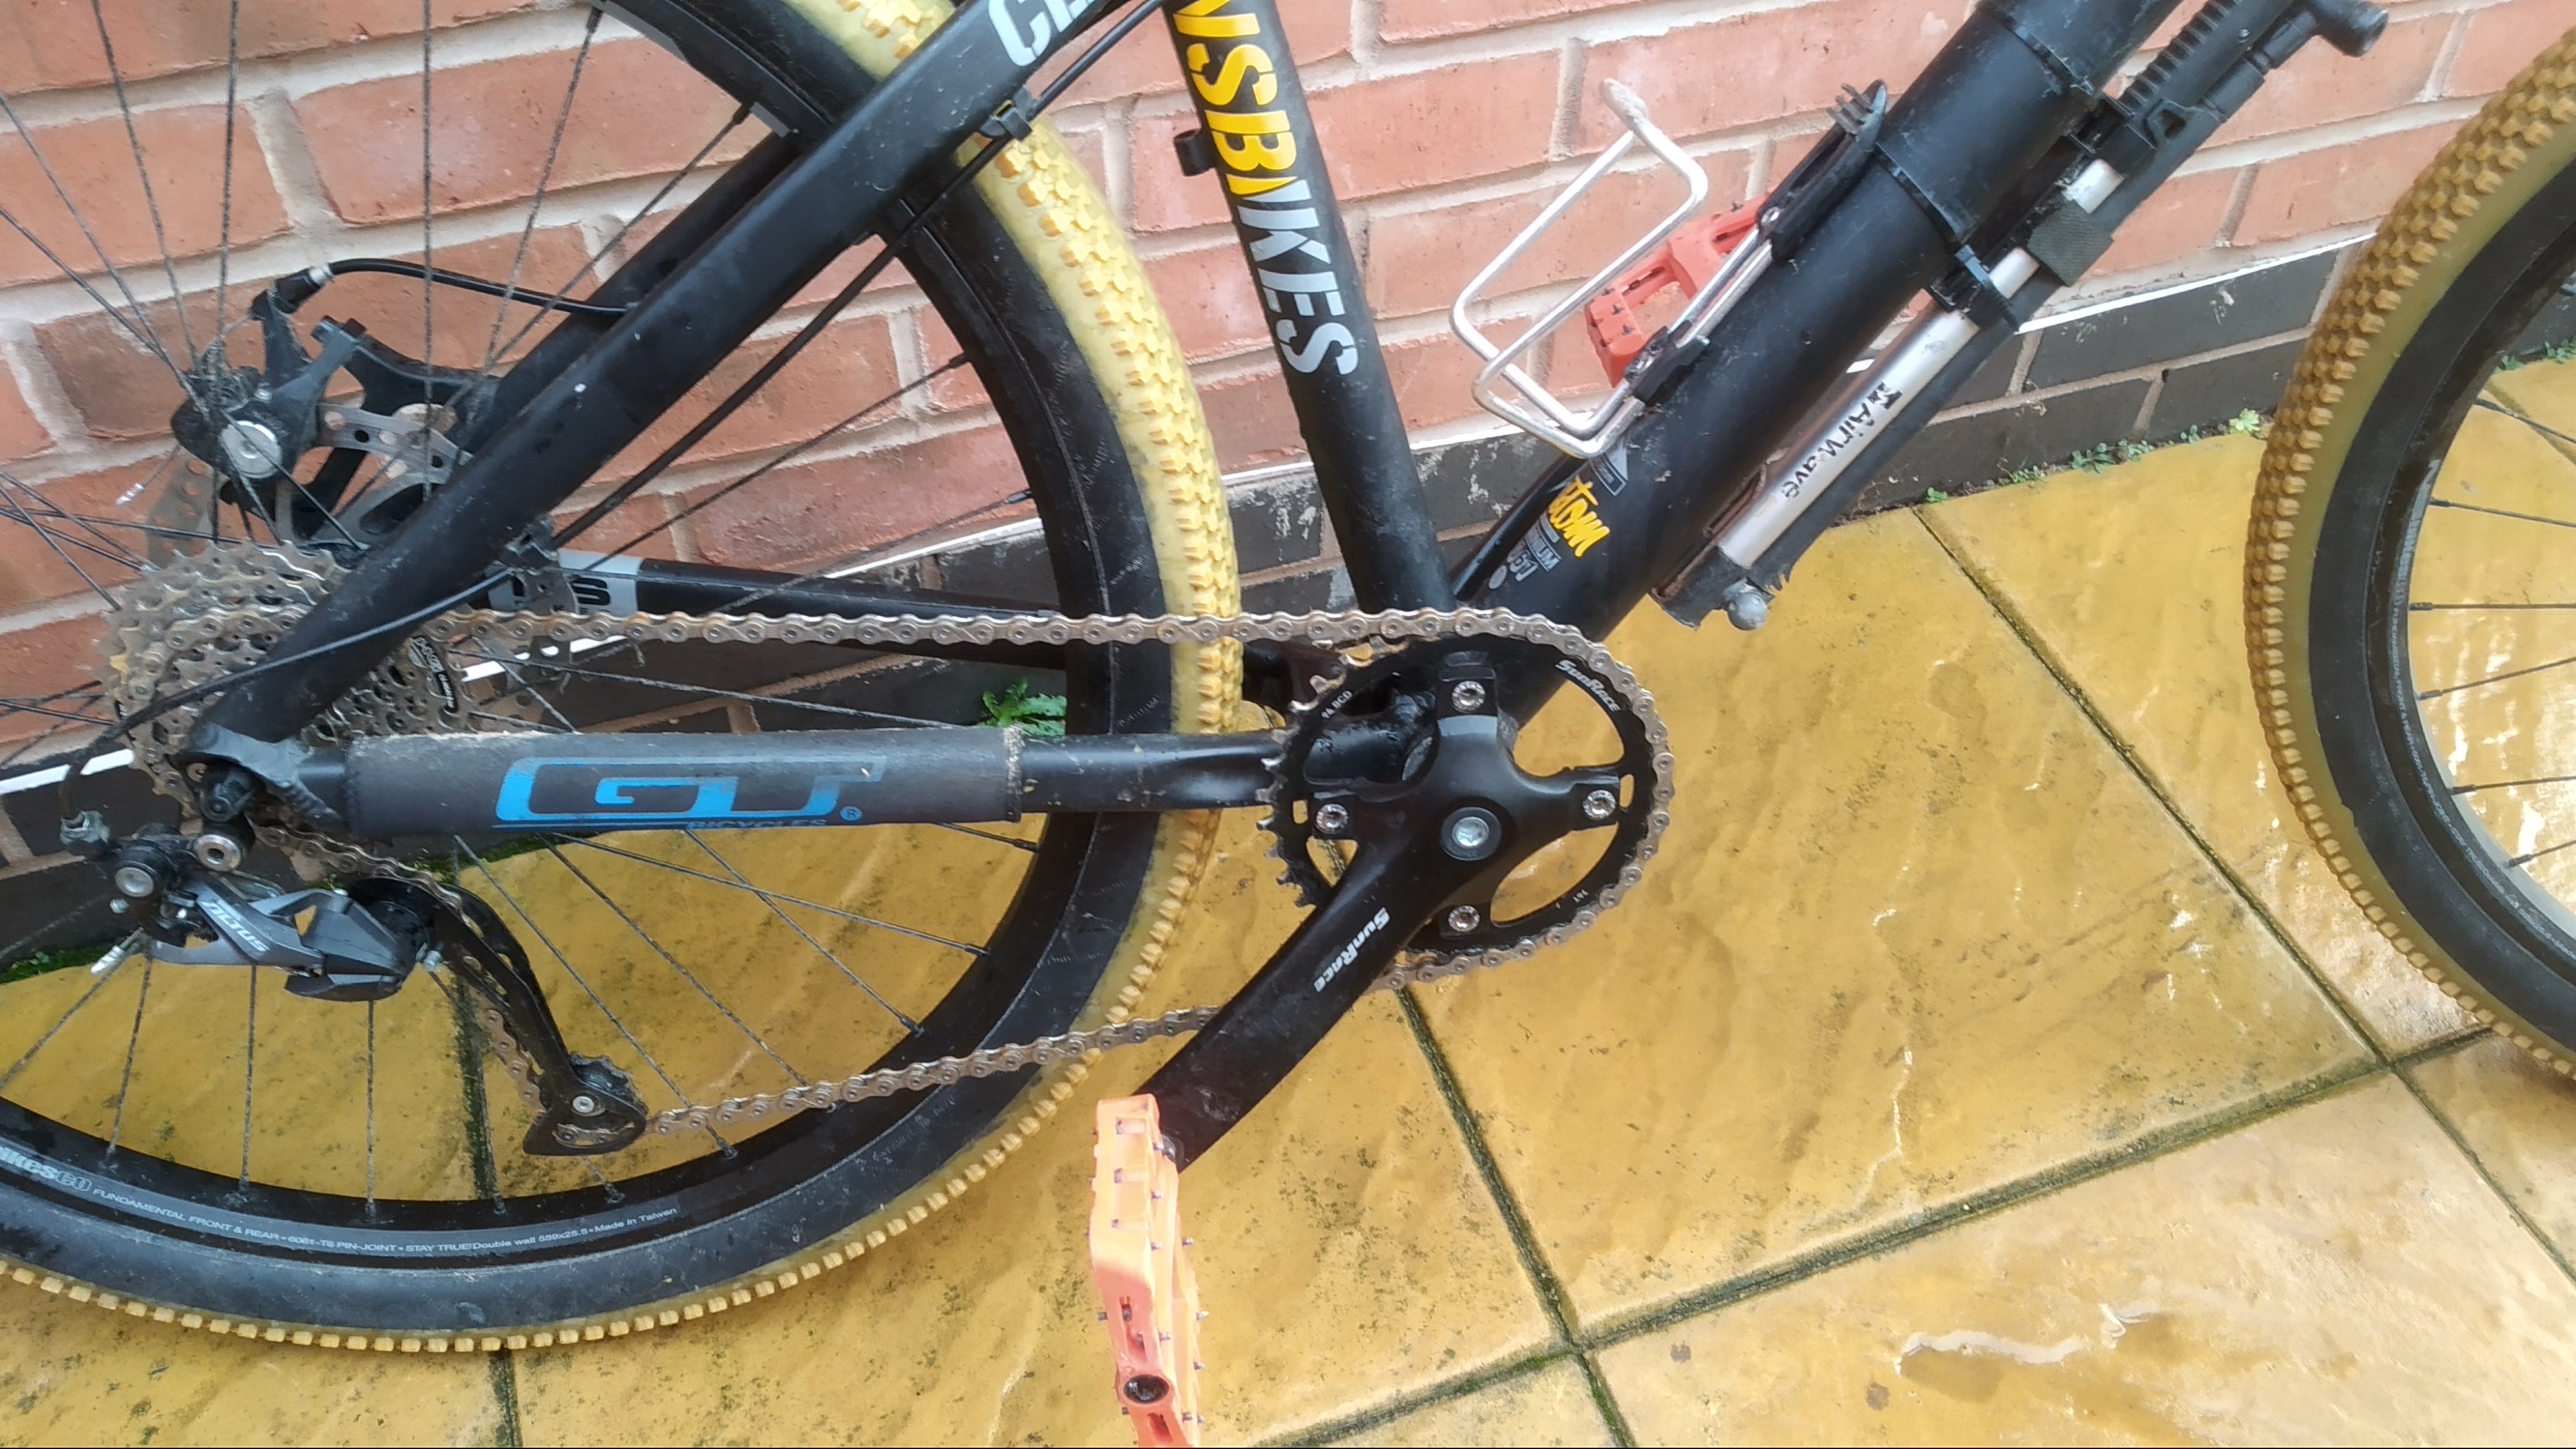 The lower half of a mountain bike. It has yellow tyres, orange pedals, and a basic one by crank